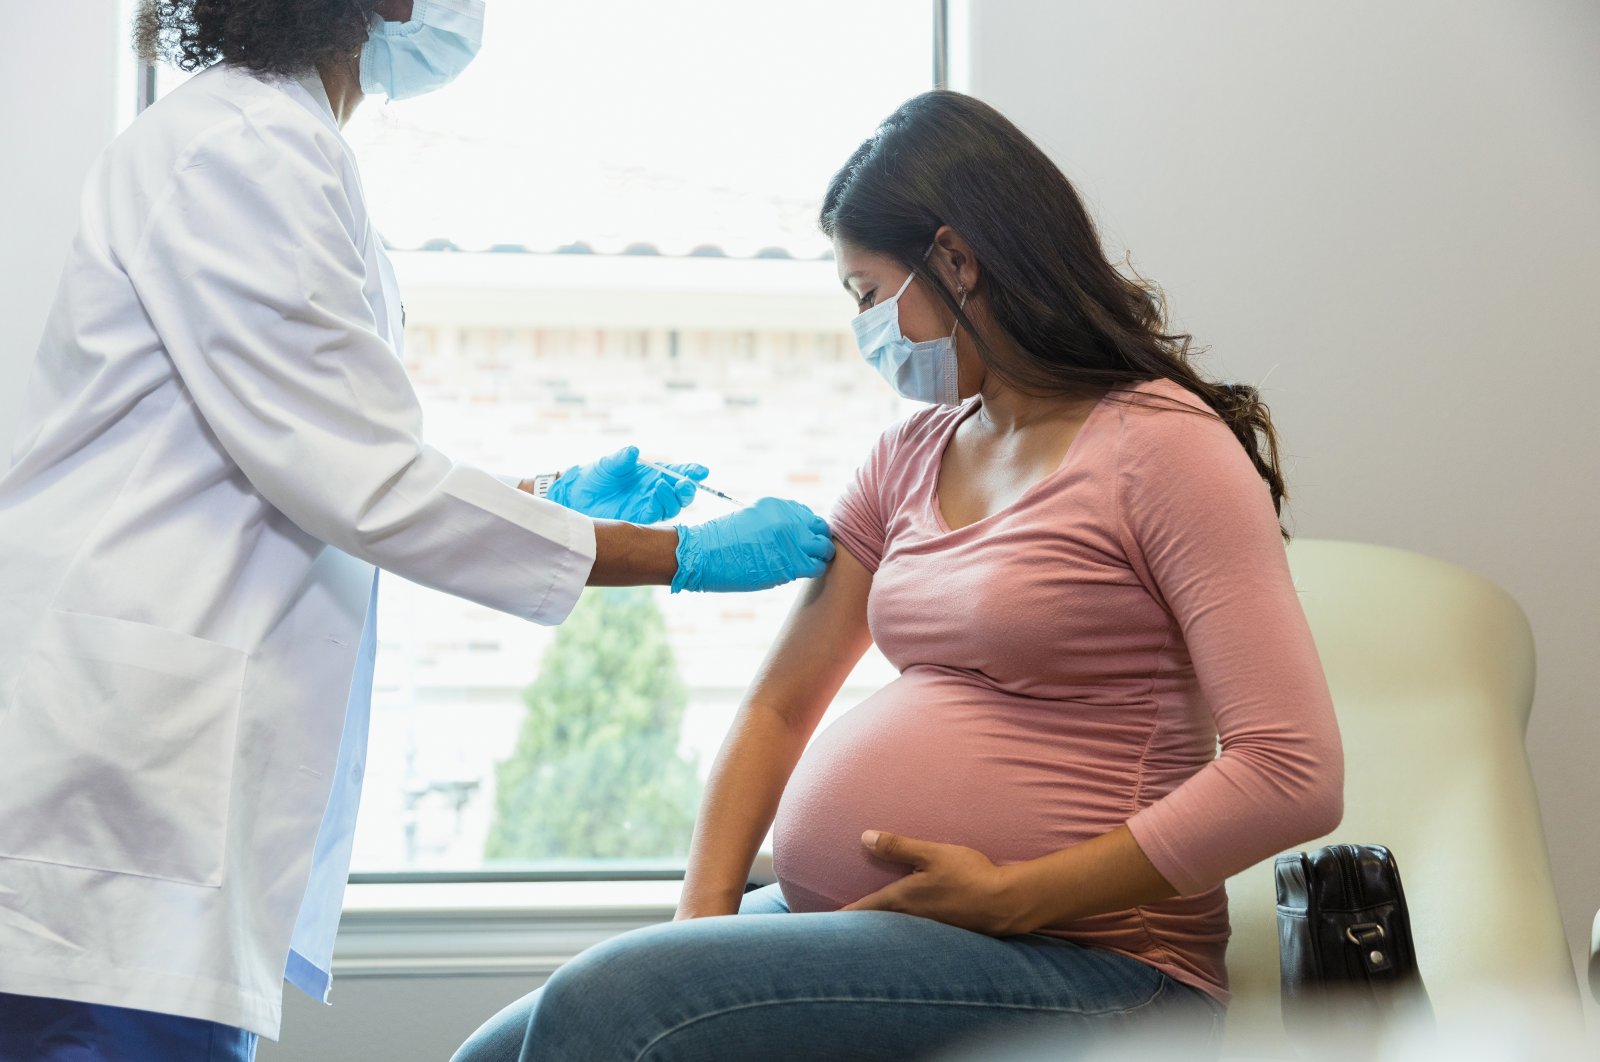 A pregnant woman receives a COVID-19 vaccine. (Getty Images)